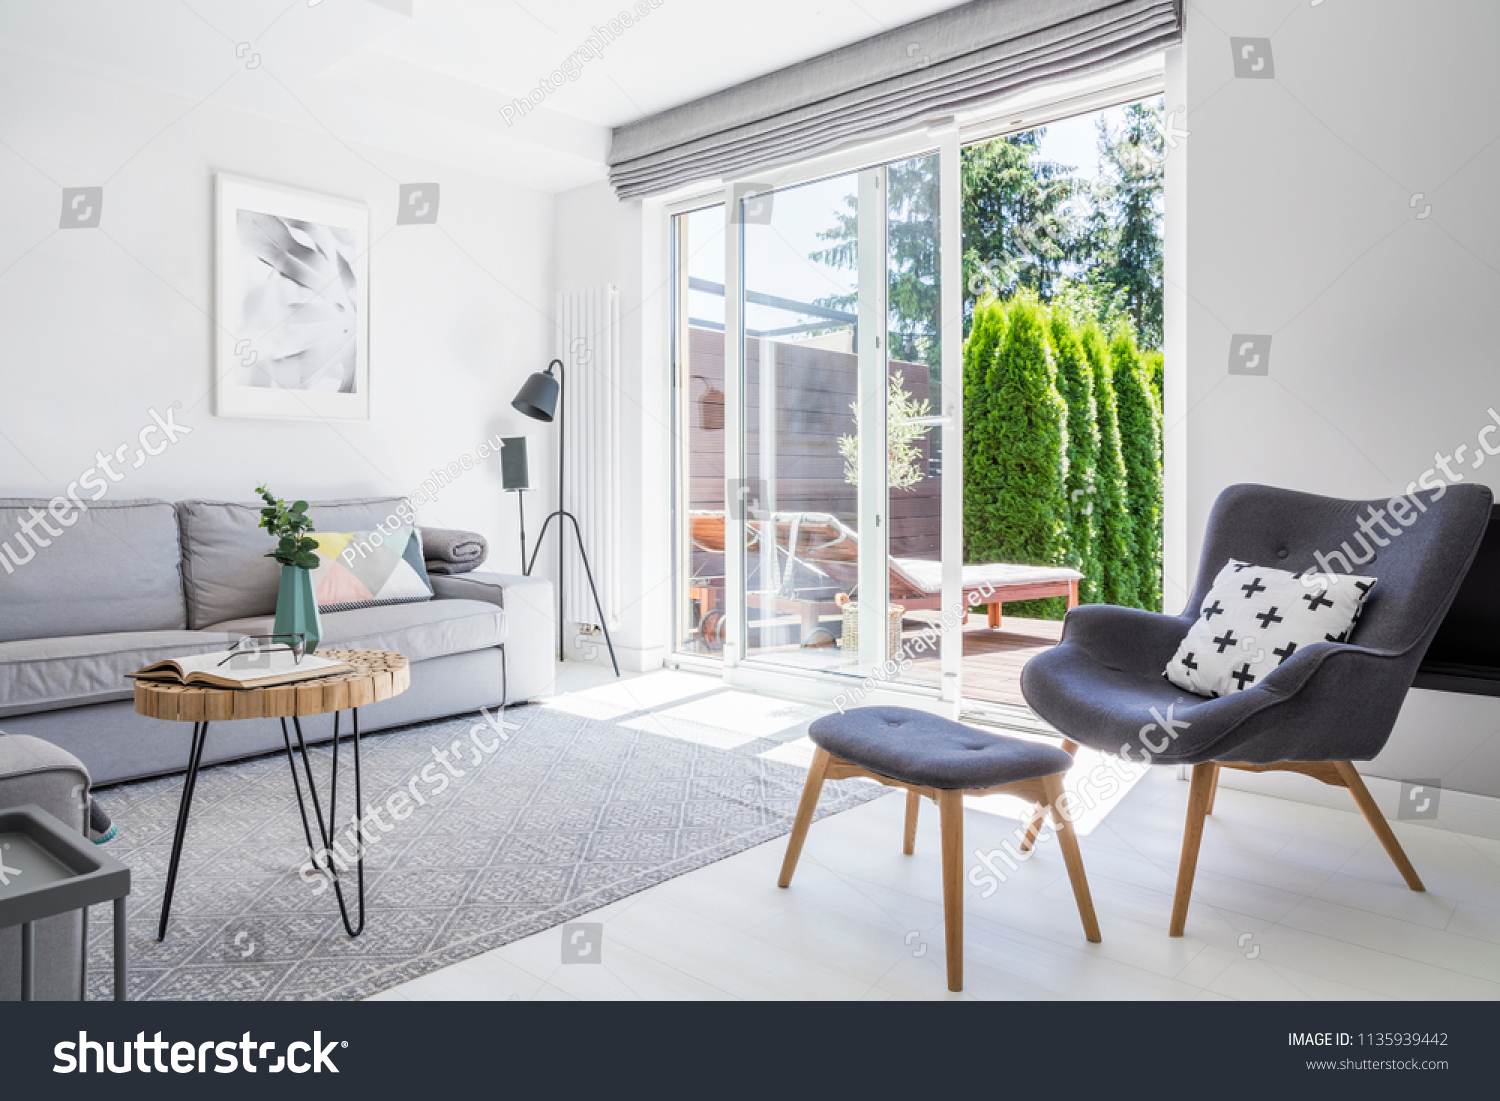 Armchair with patterned pillow and stool in living room interior with grey sofa and posters. Real photo #1135939442